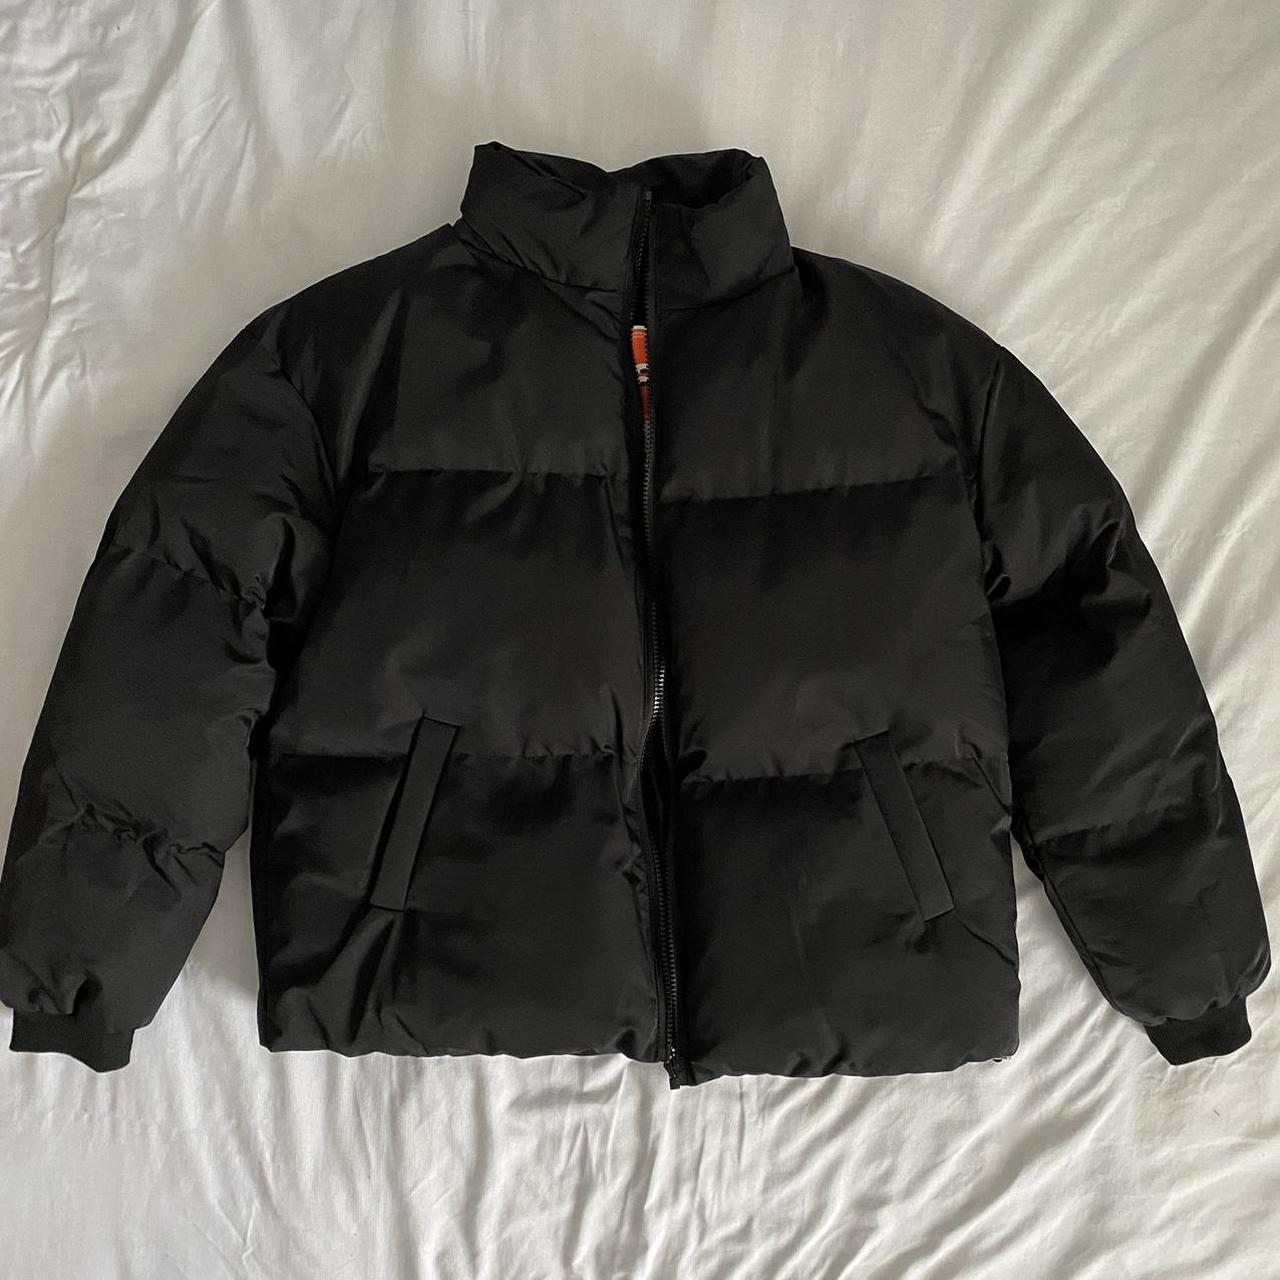 Cider Black Puffer - oversized - size small - no... - Depop